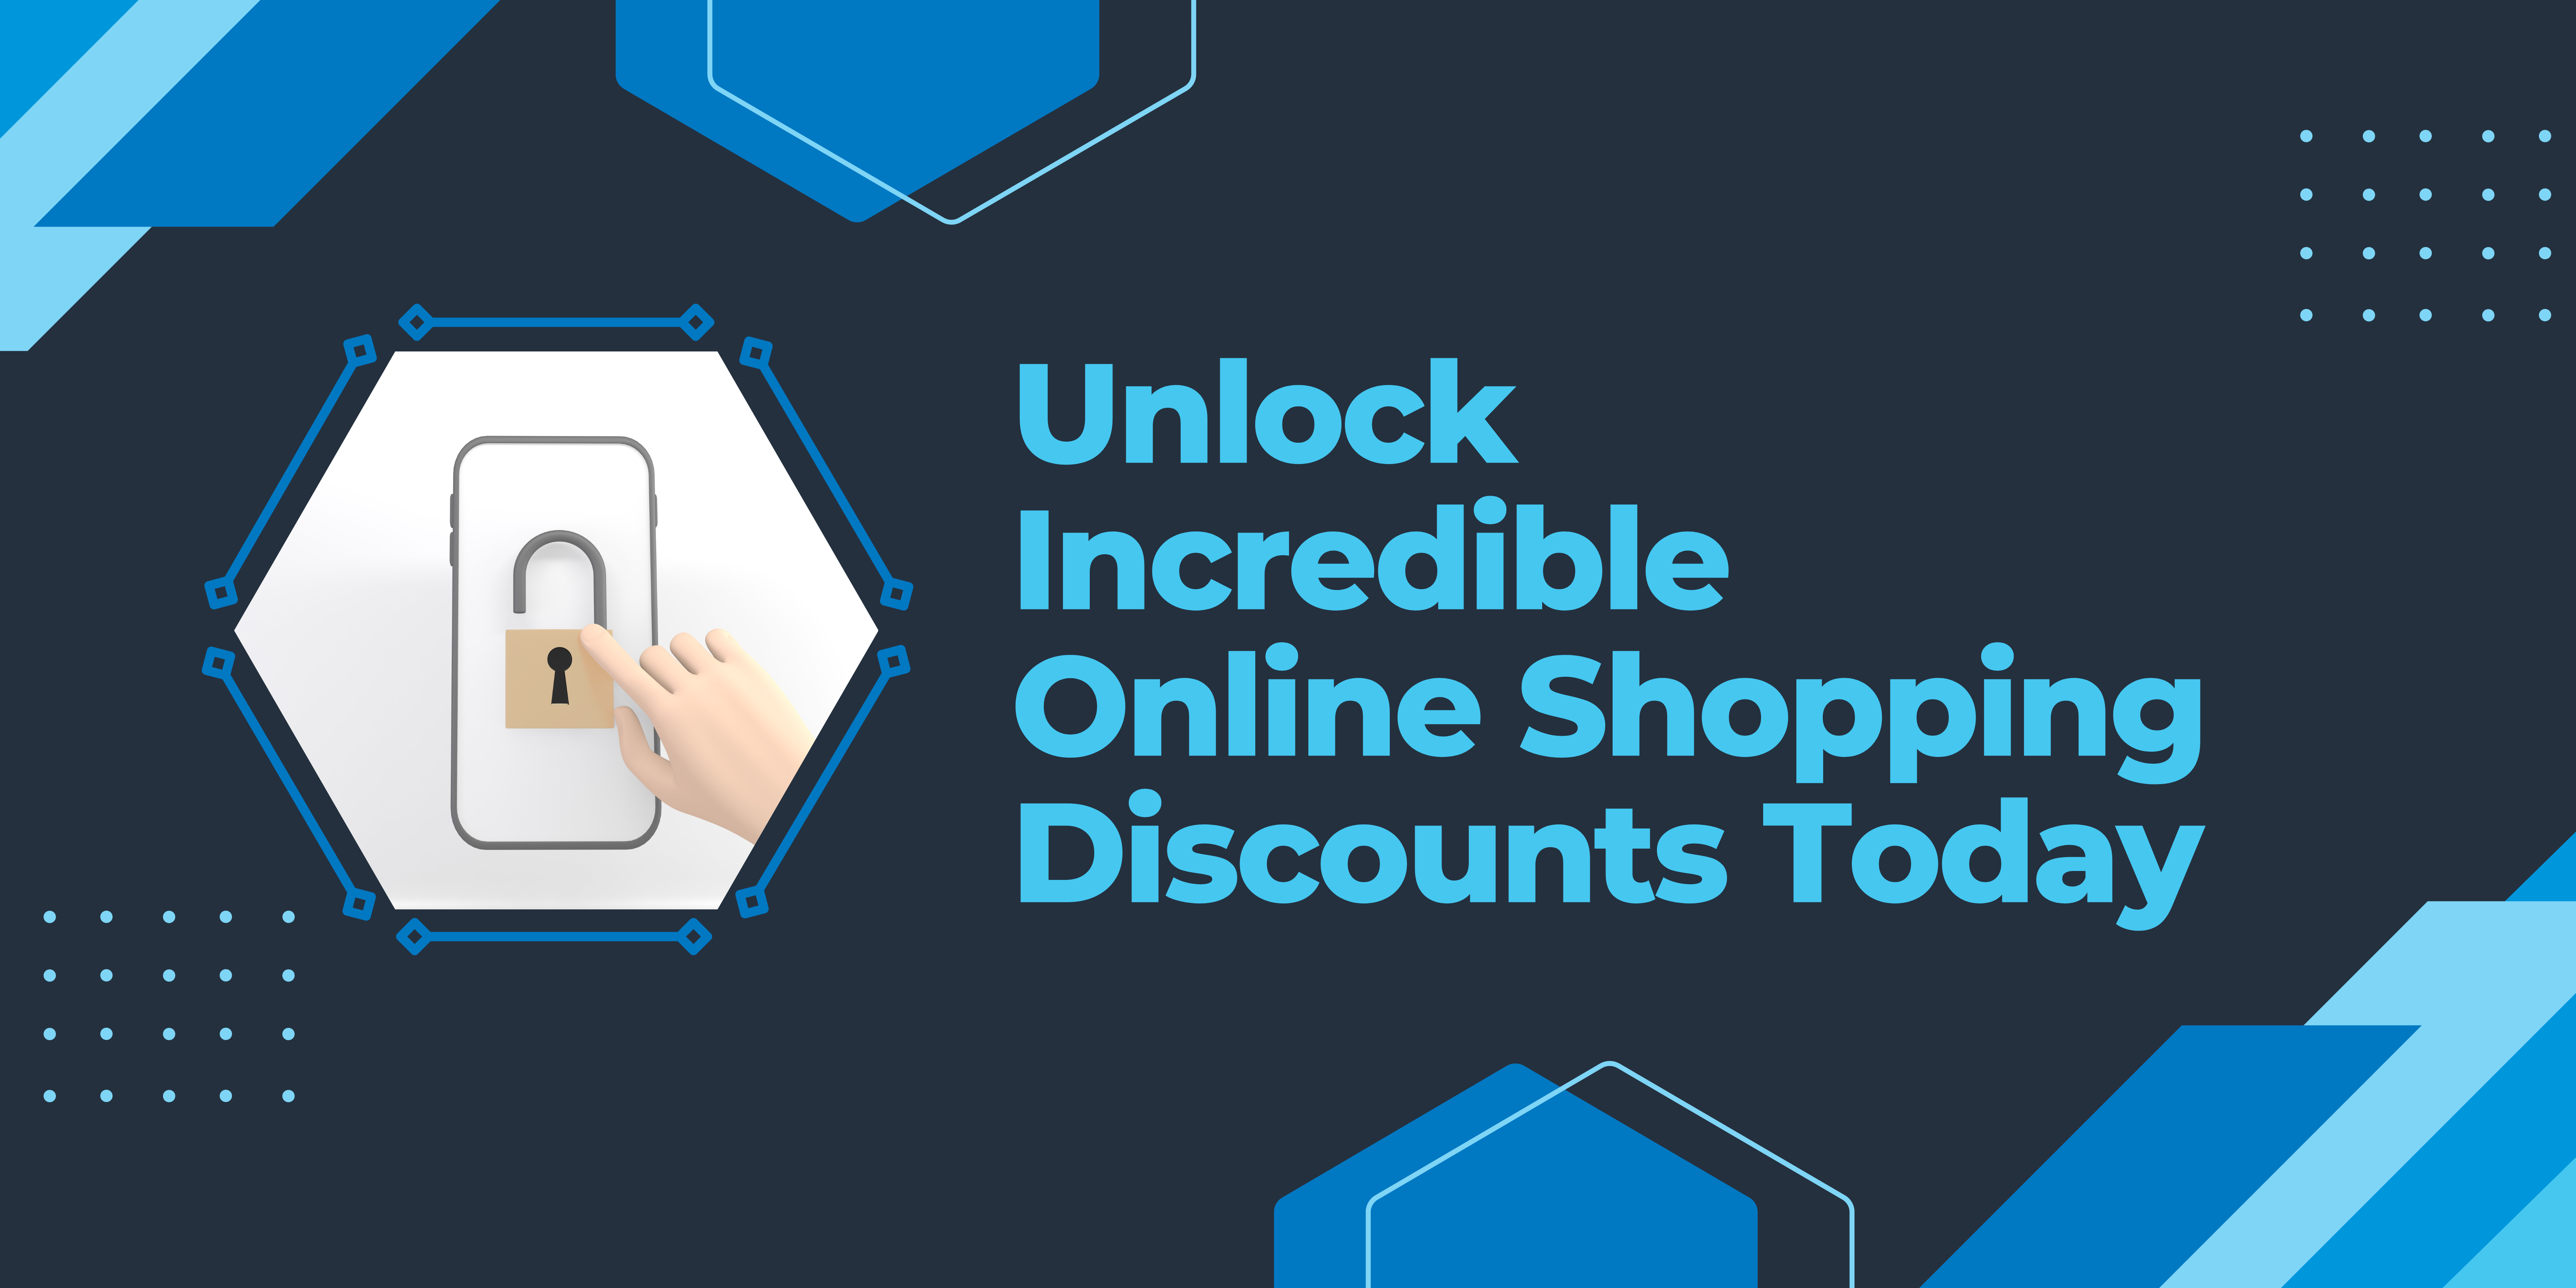 Unlock Incredible Online Shopping Discounts Today